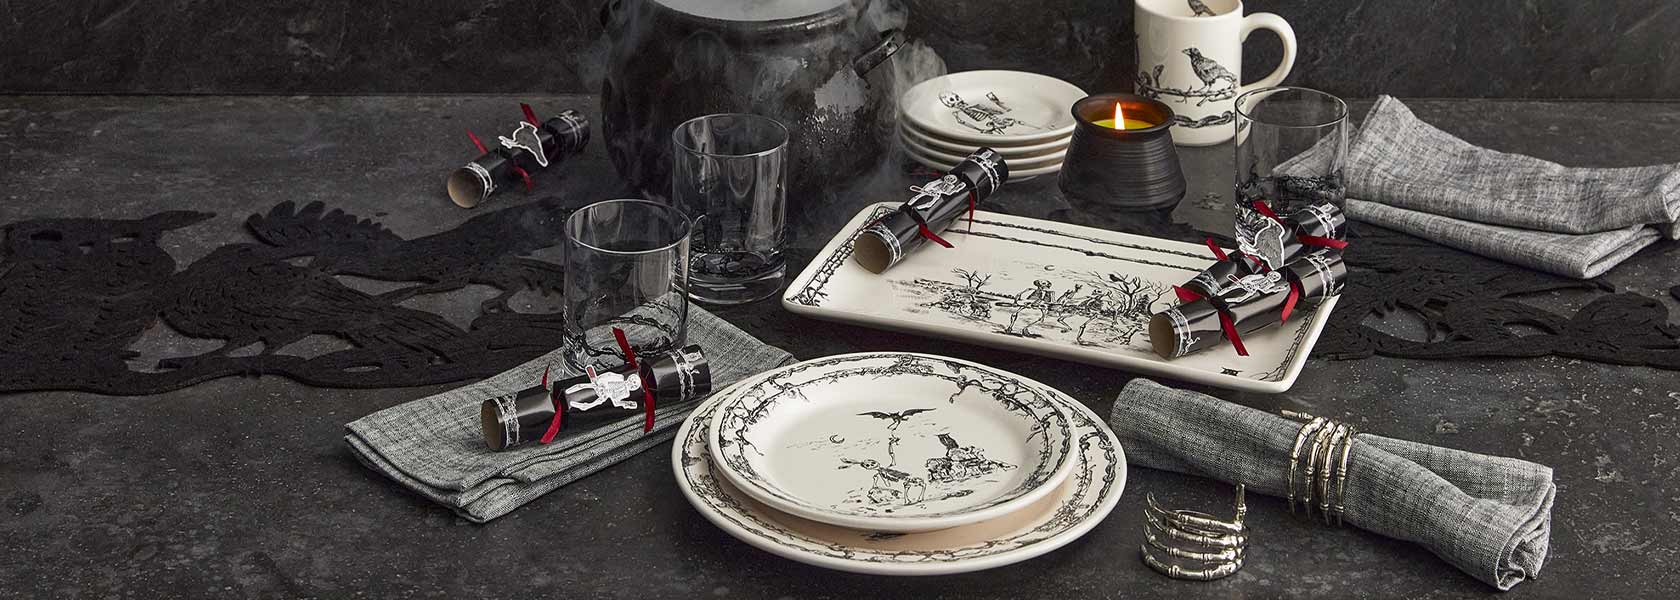 Halloween glassware and serveware with skeleton and bat motif